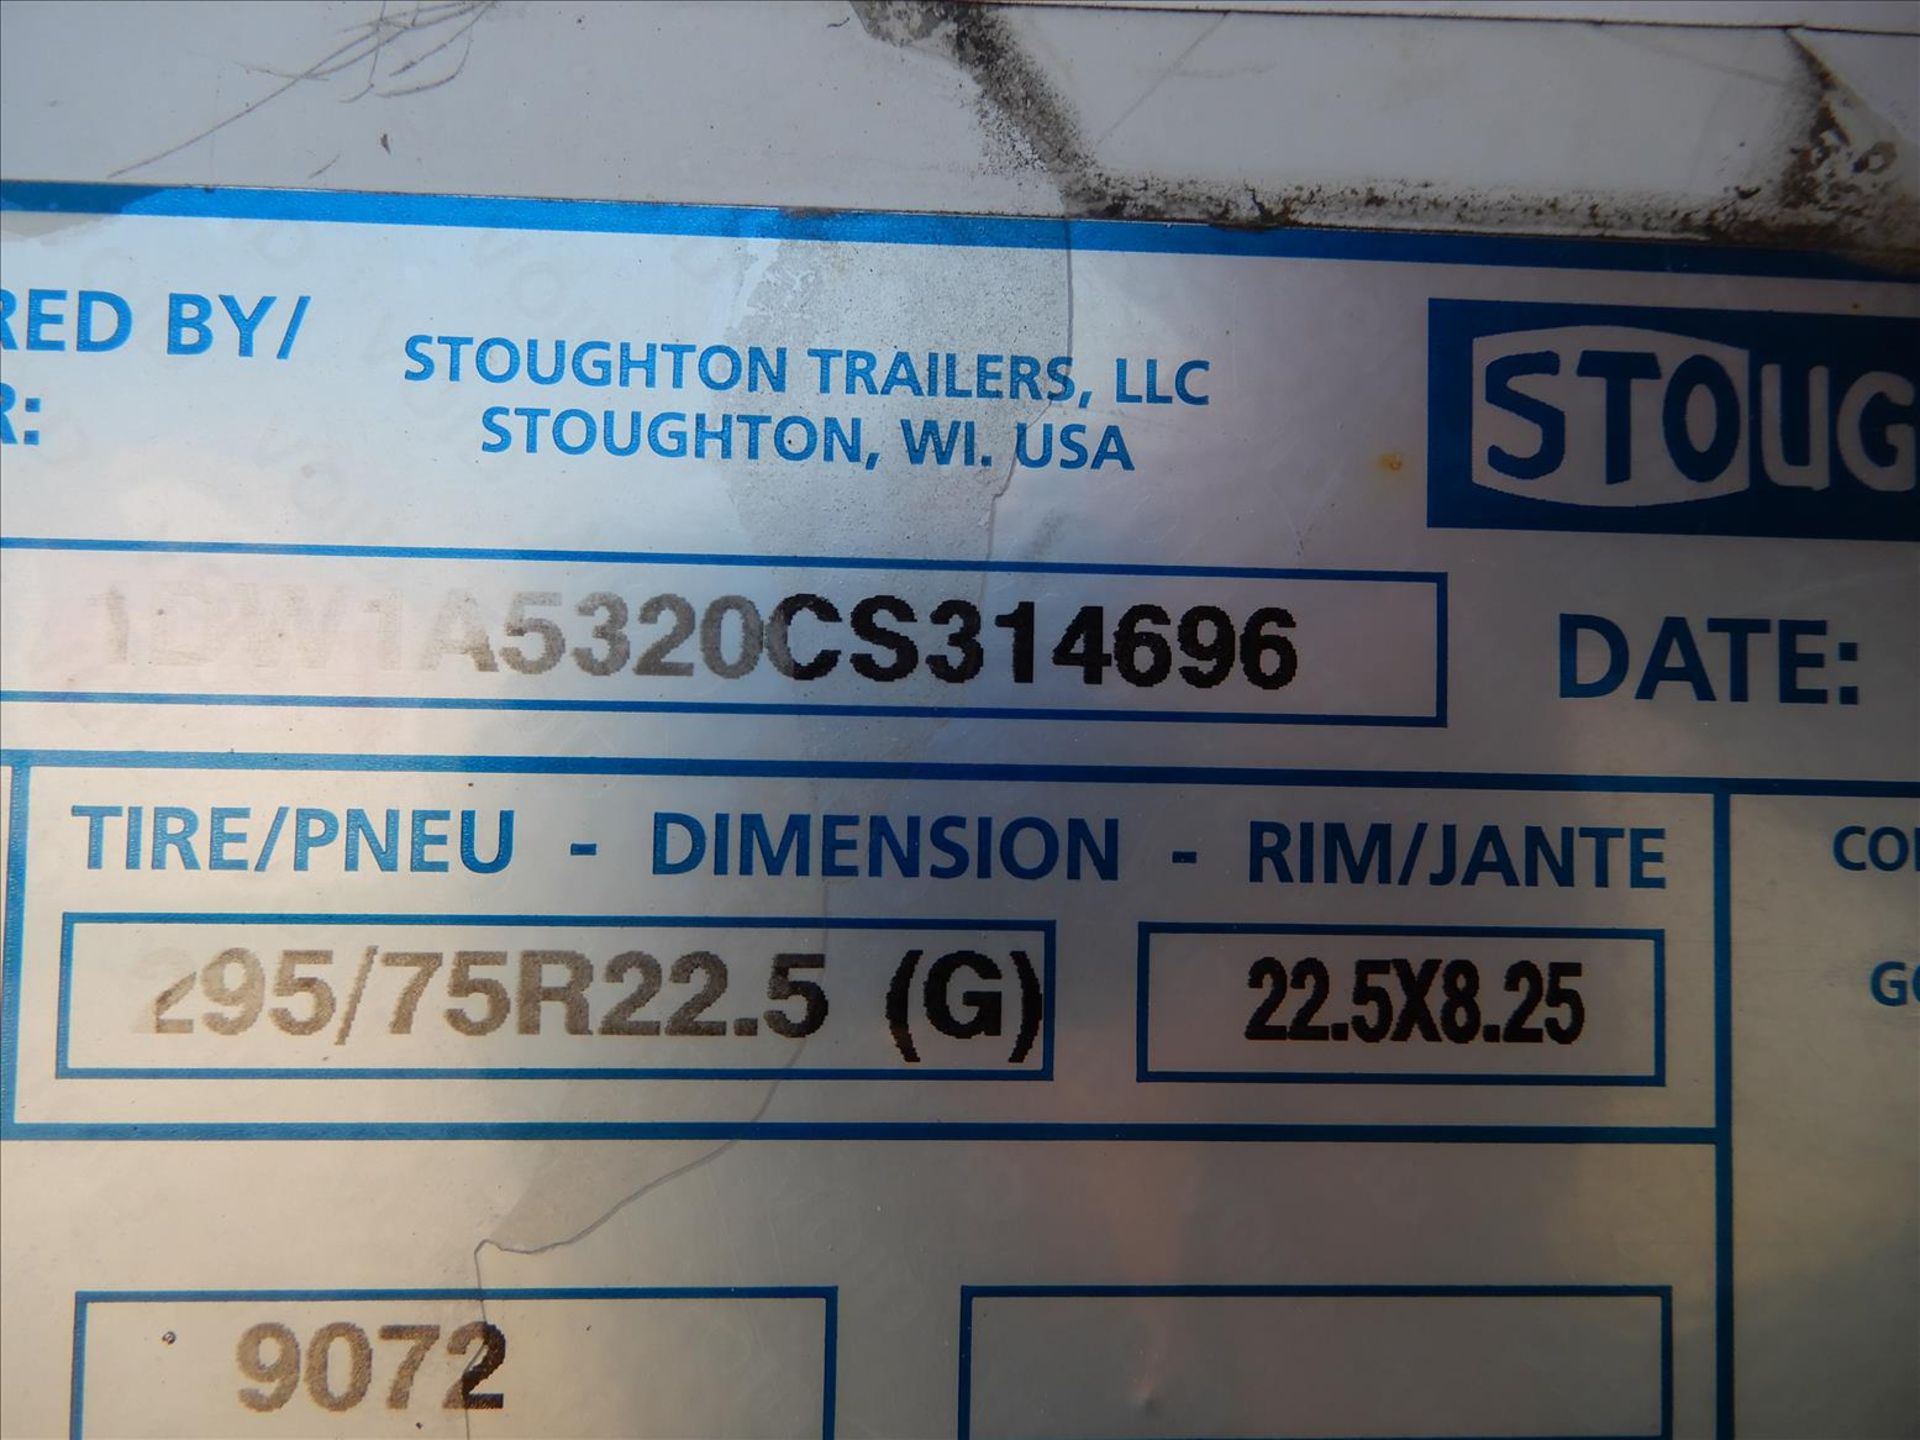 2012 Stoughton Trailer - Located in Indianapolis, IN - Image 30 of 31